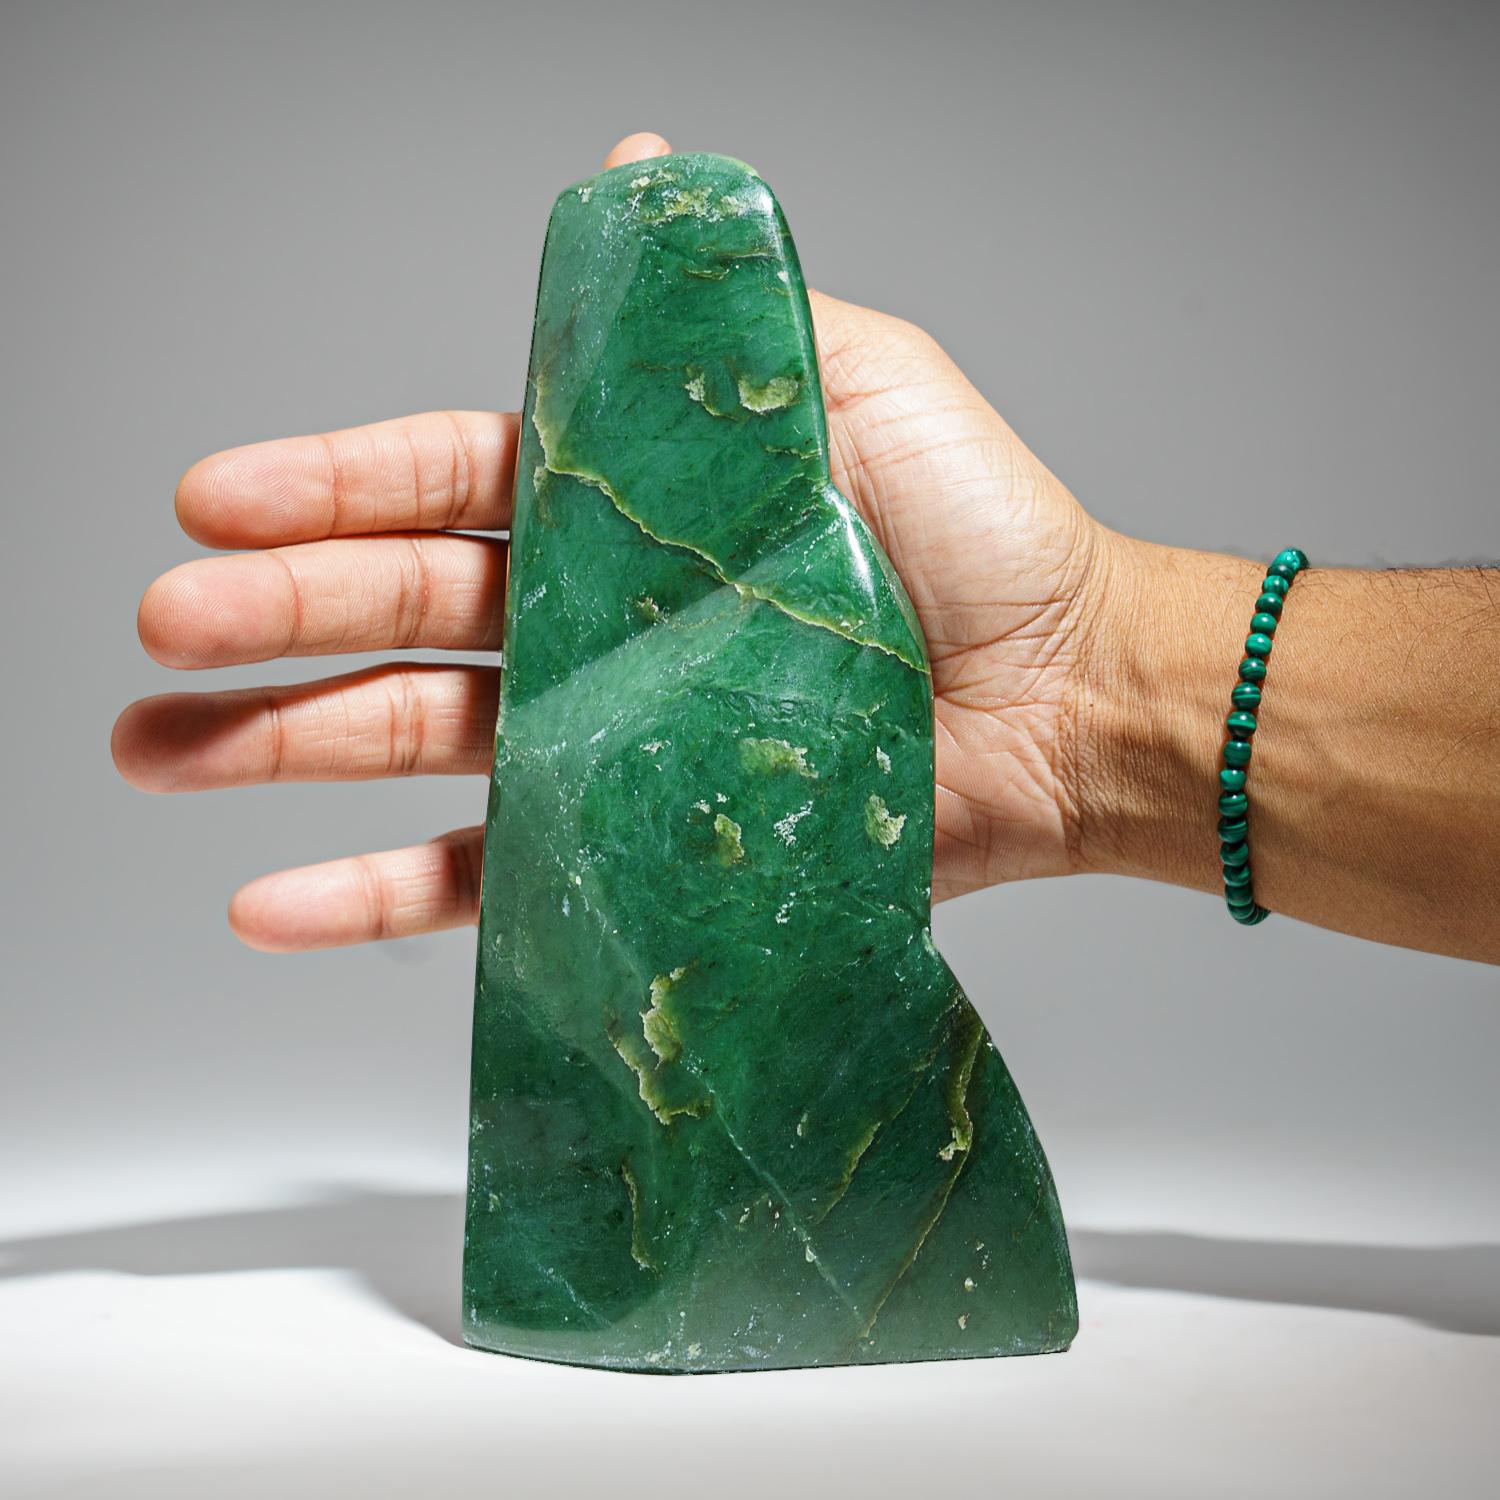 Polished Nephrite Jade Freeform from Pakistan '2.5 lbs' For Sale 1